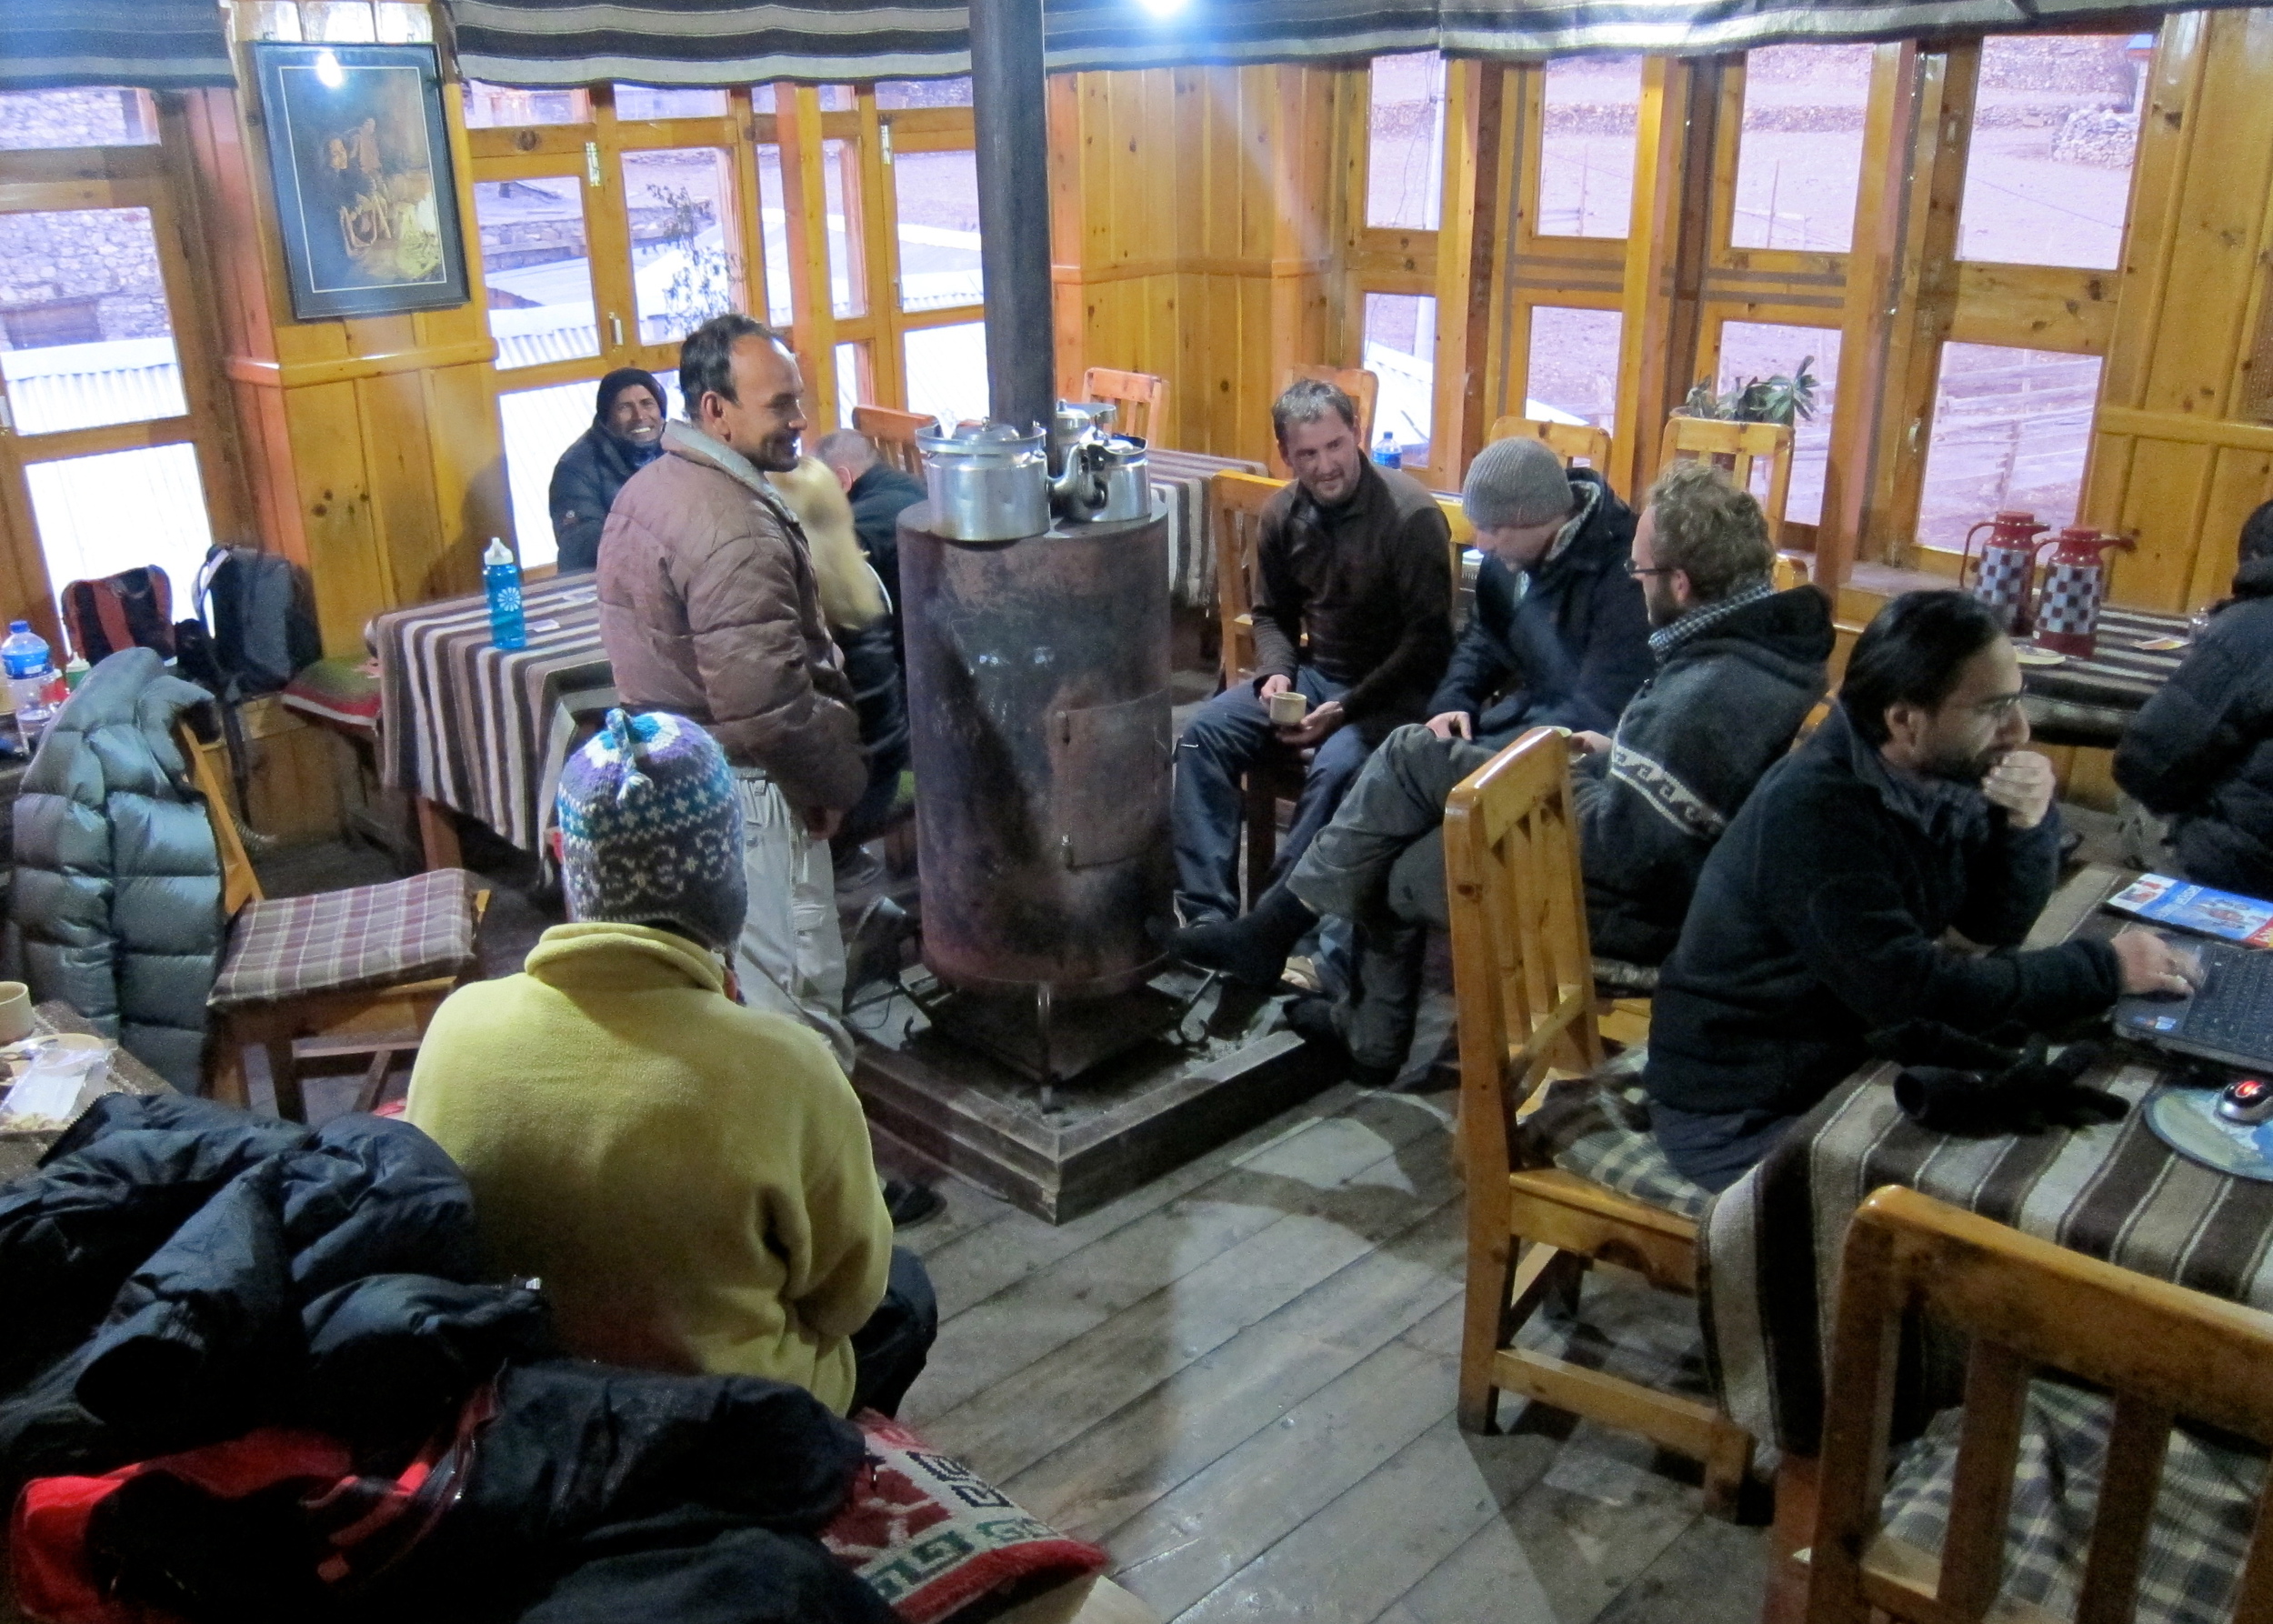 Welcome shelter by the fire on the Annapurna Circuit. Image by Andrew Hyde / CC BY 2.0.